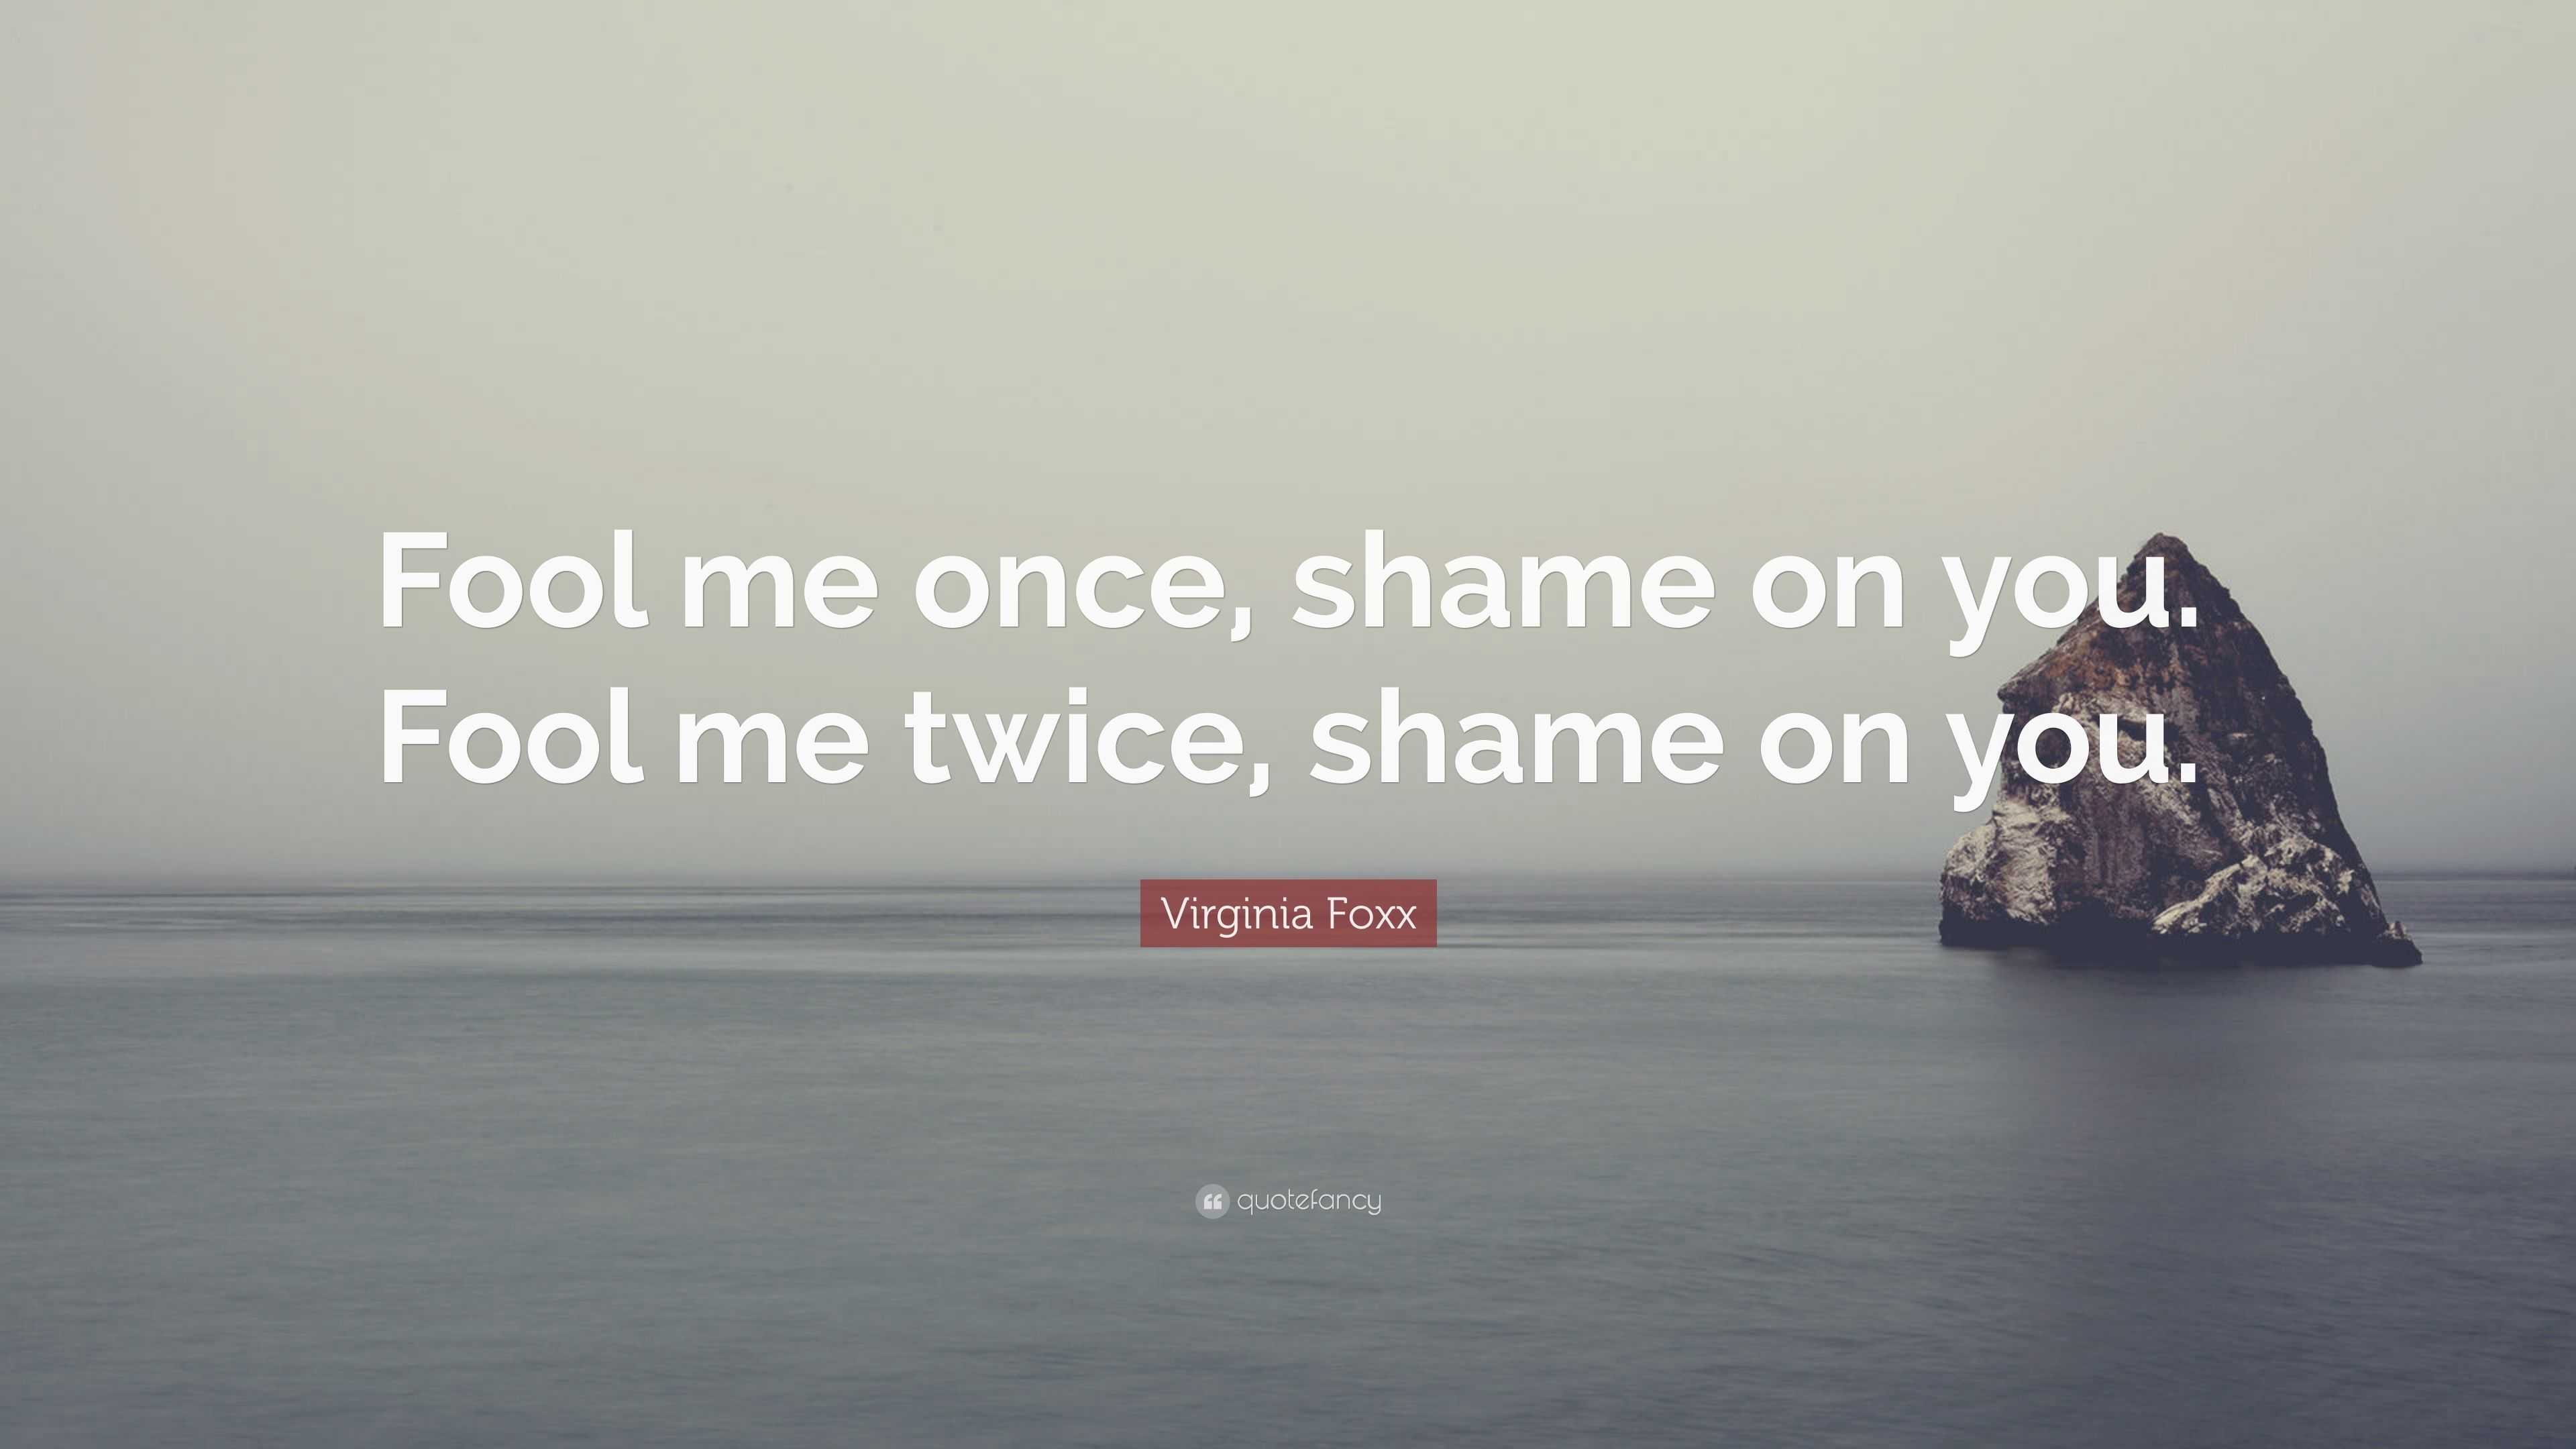 Virginia Foxx Quote: “Fool me once, shame on you. Fool me twice, shame